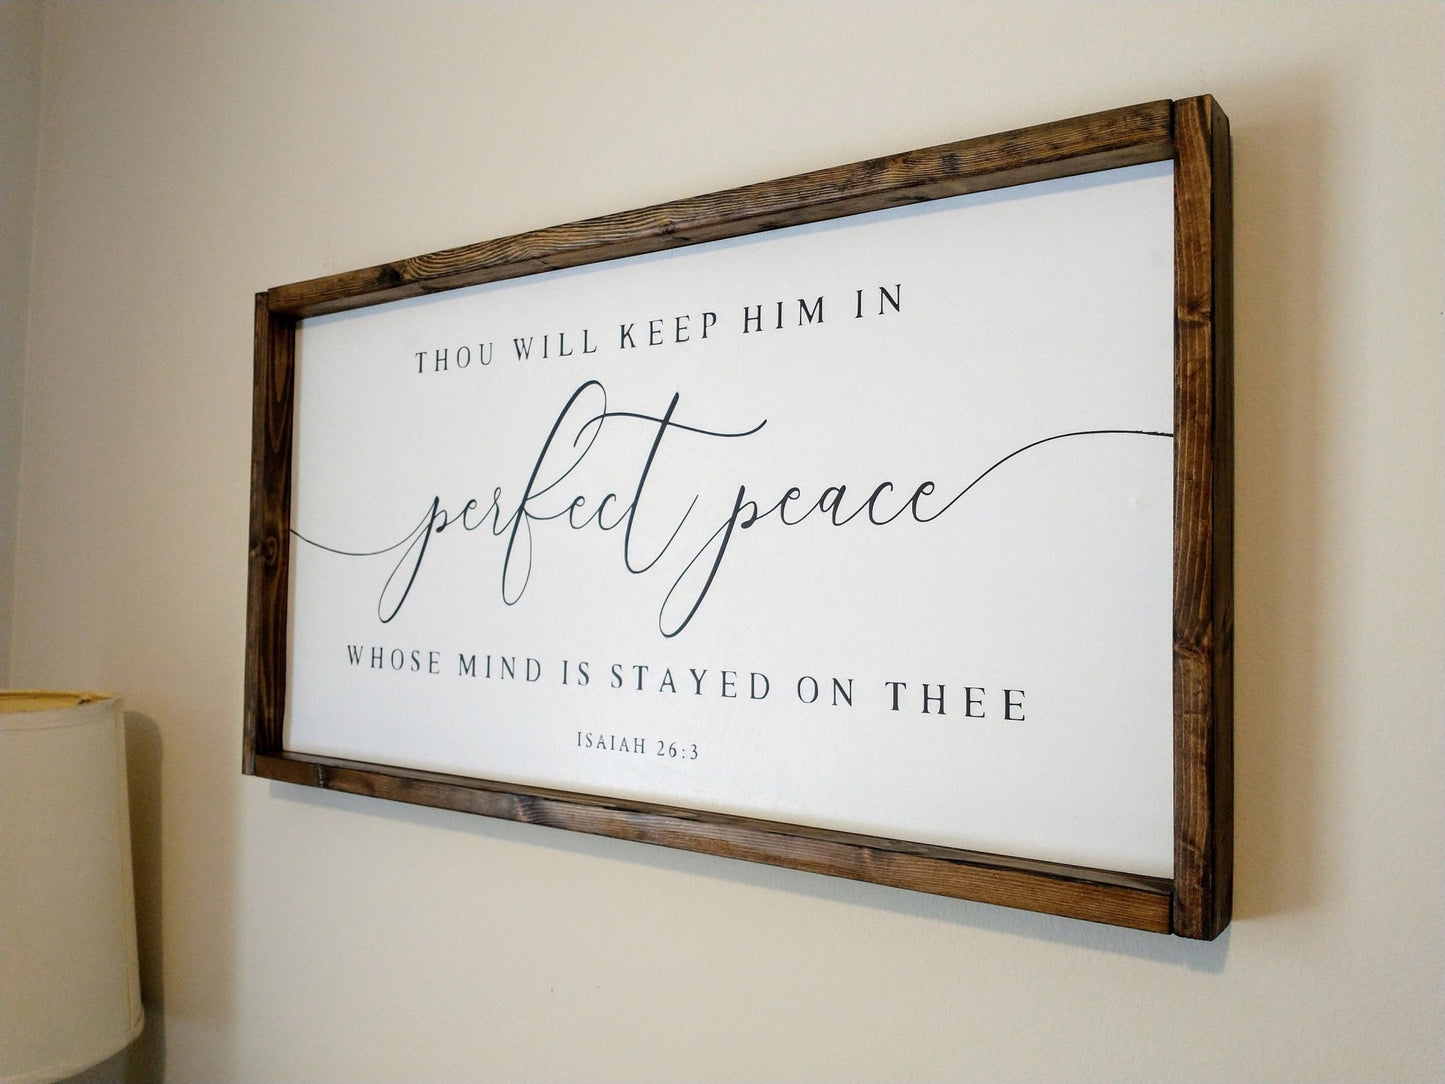 Thou Will Keep Him in Perfect Peace, Whose Mind is Stayed on Thee" Philippians 4:8 Rustic Wood Sign - Forever Written